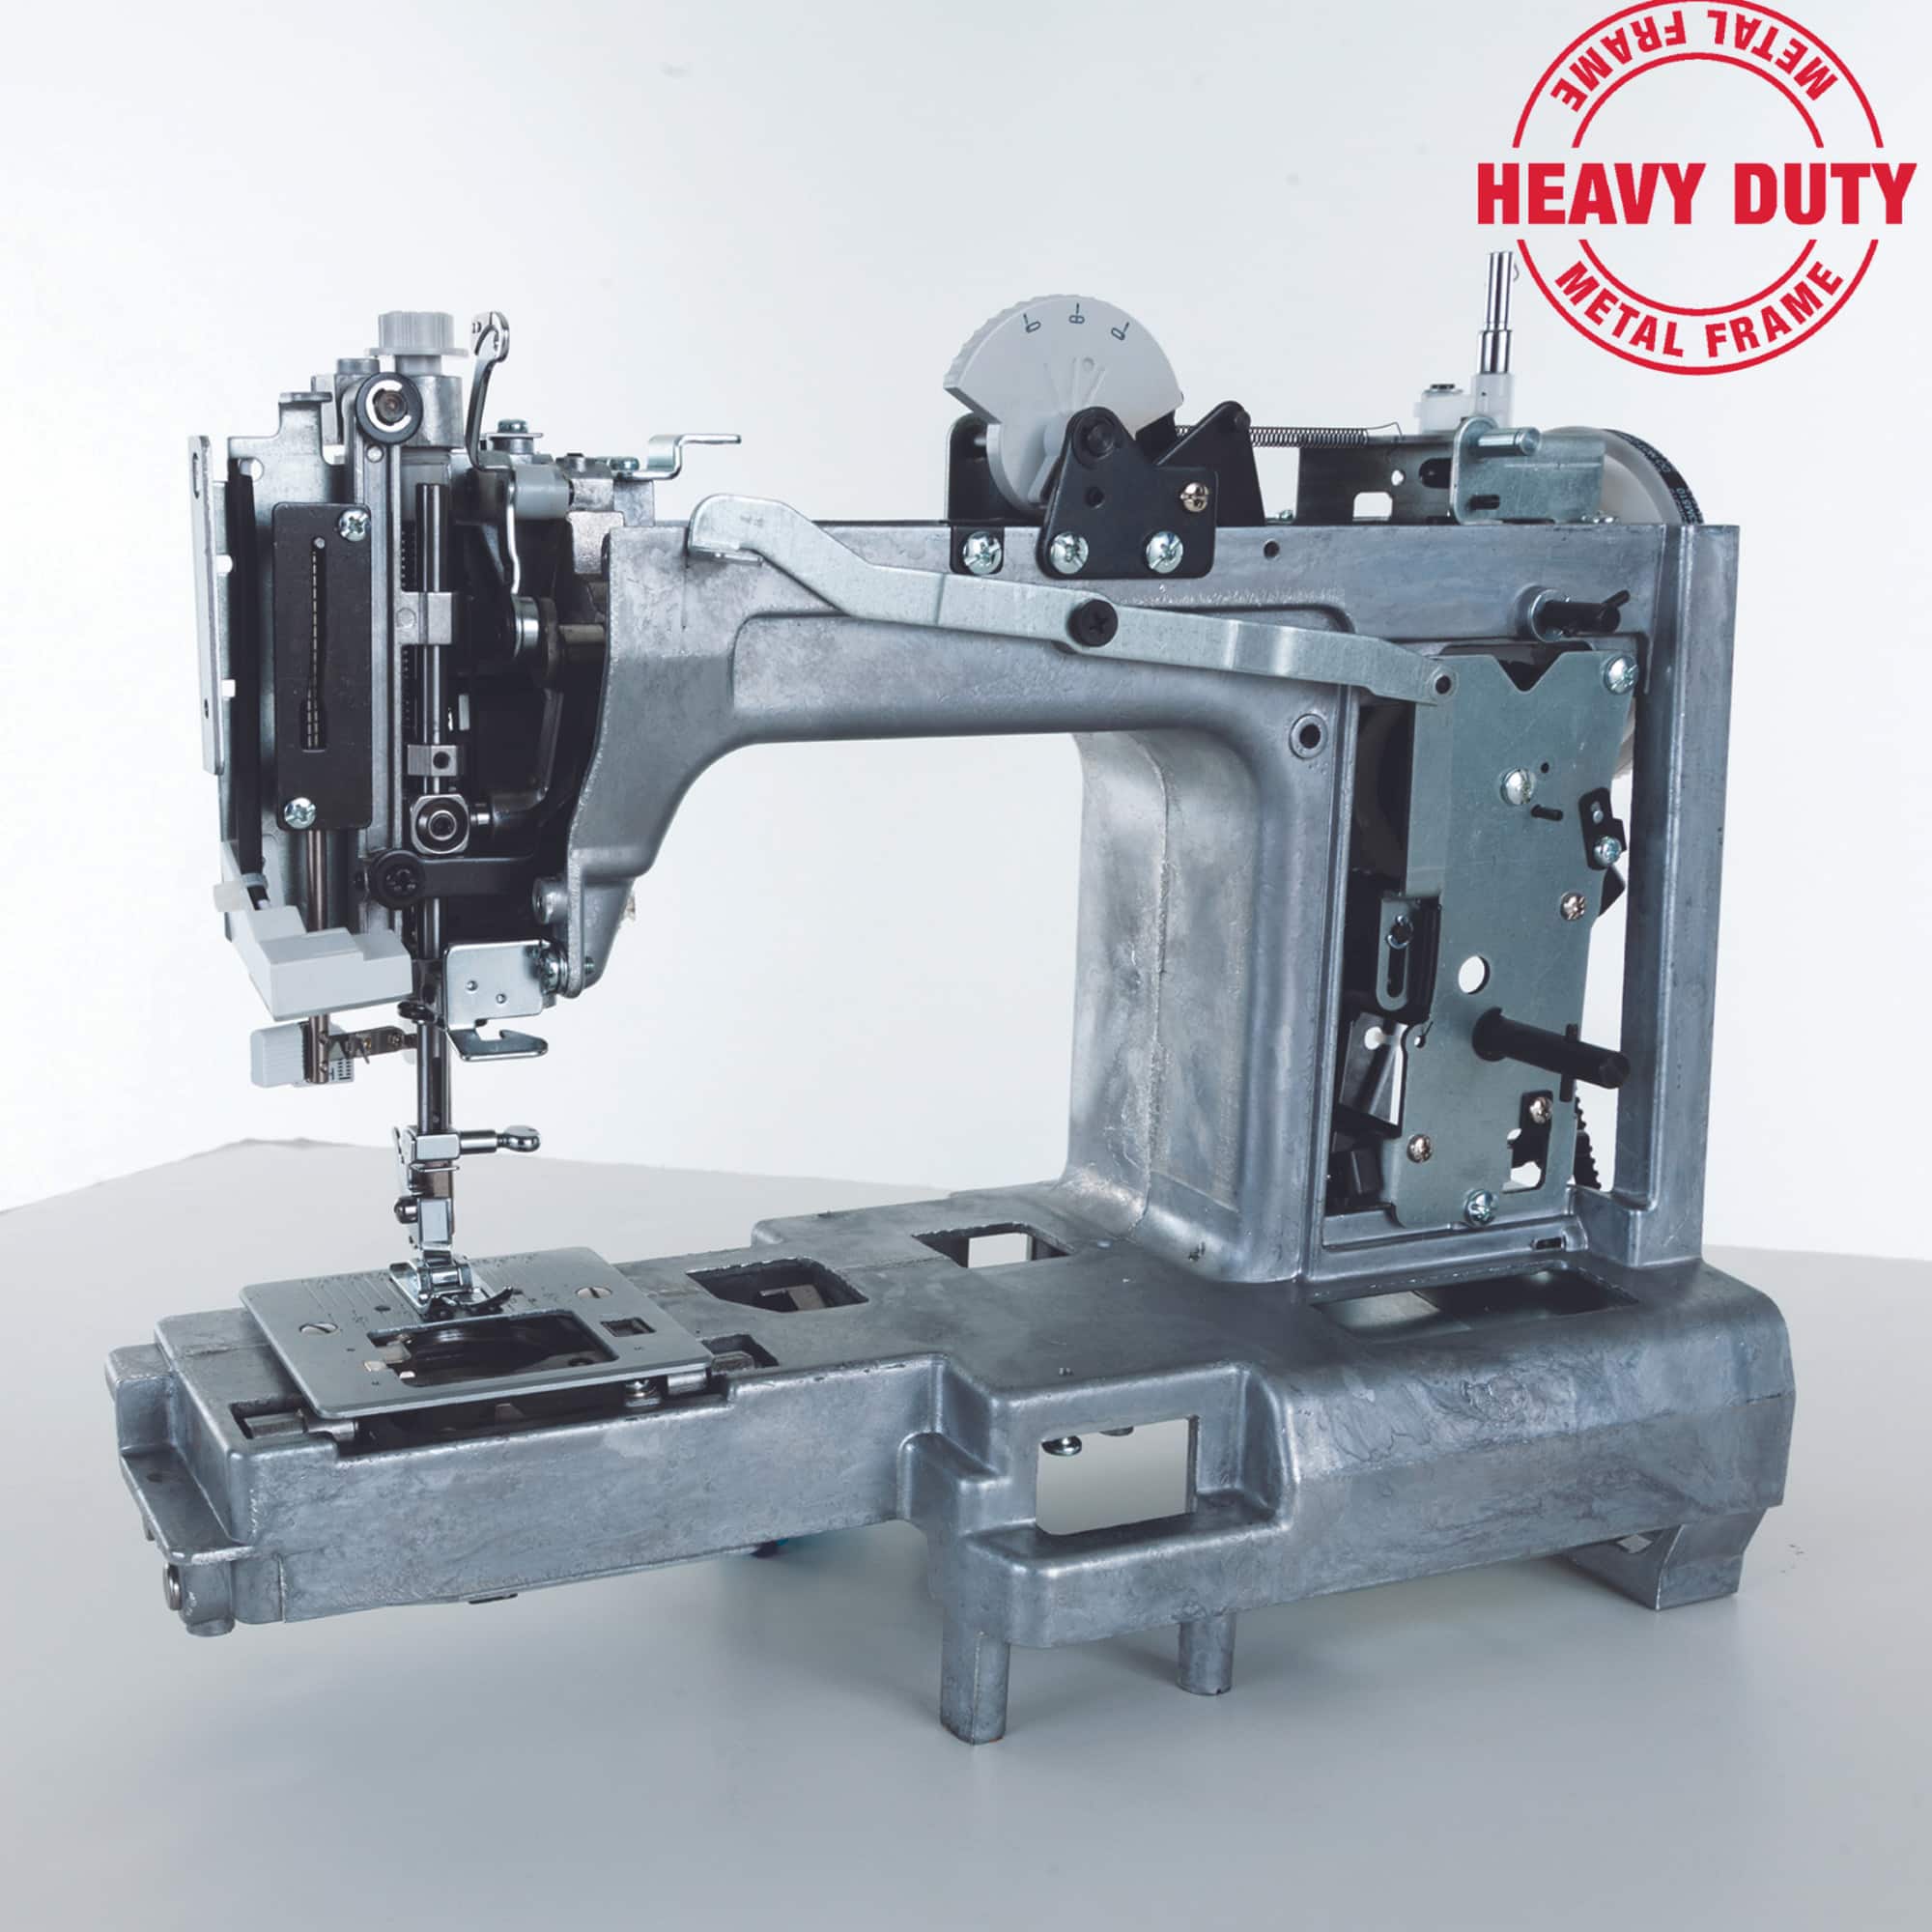 Singer Heavy Duty 4432 – The Sewing Depot